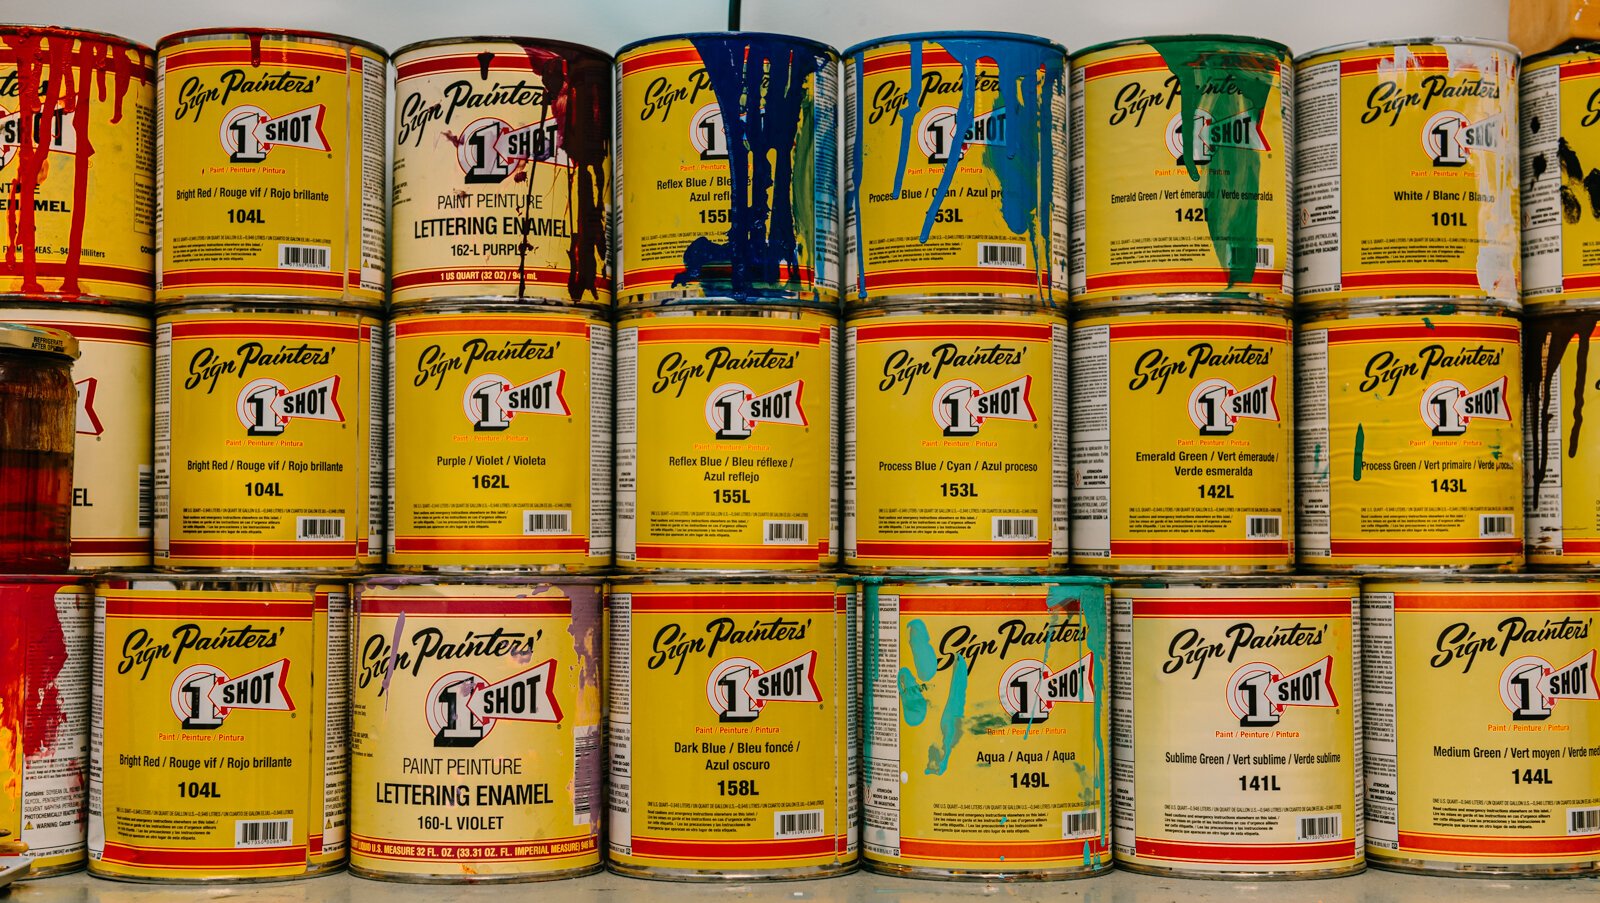 Sign Painters’ 1 Shot paint cans in Justin Lim’s shop, Old 5 and Dime Sign Co.